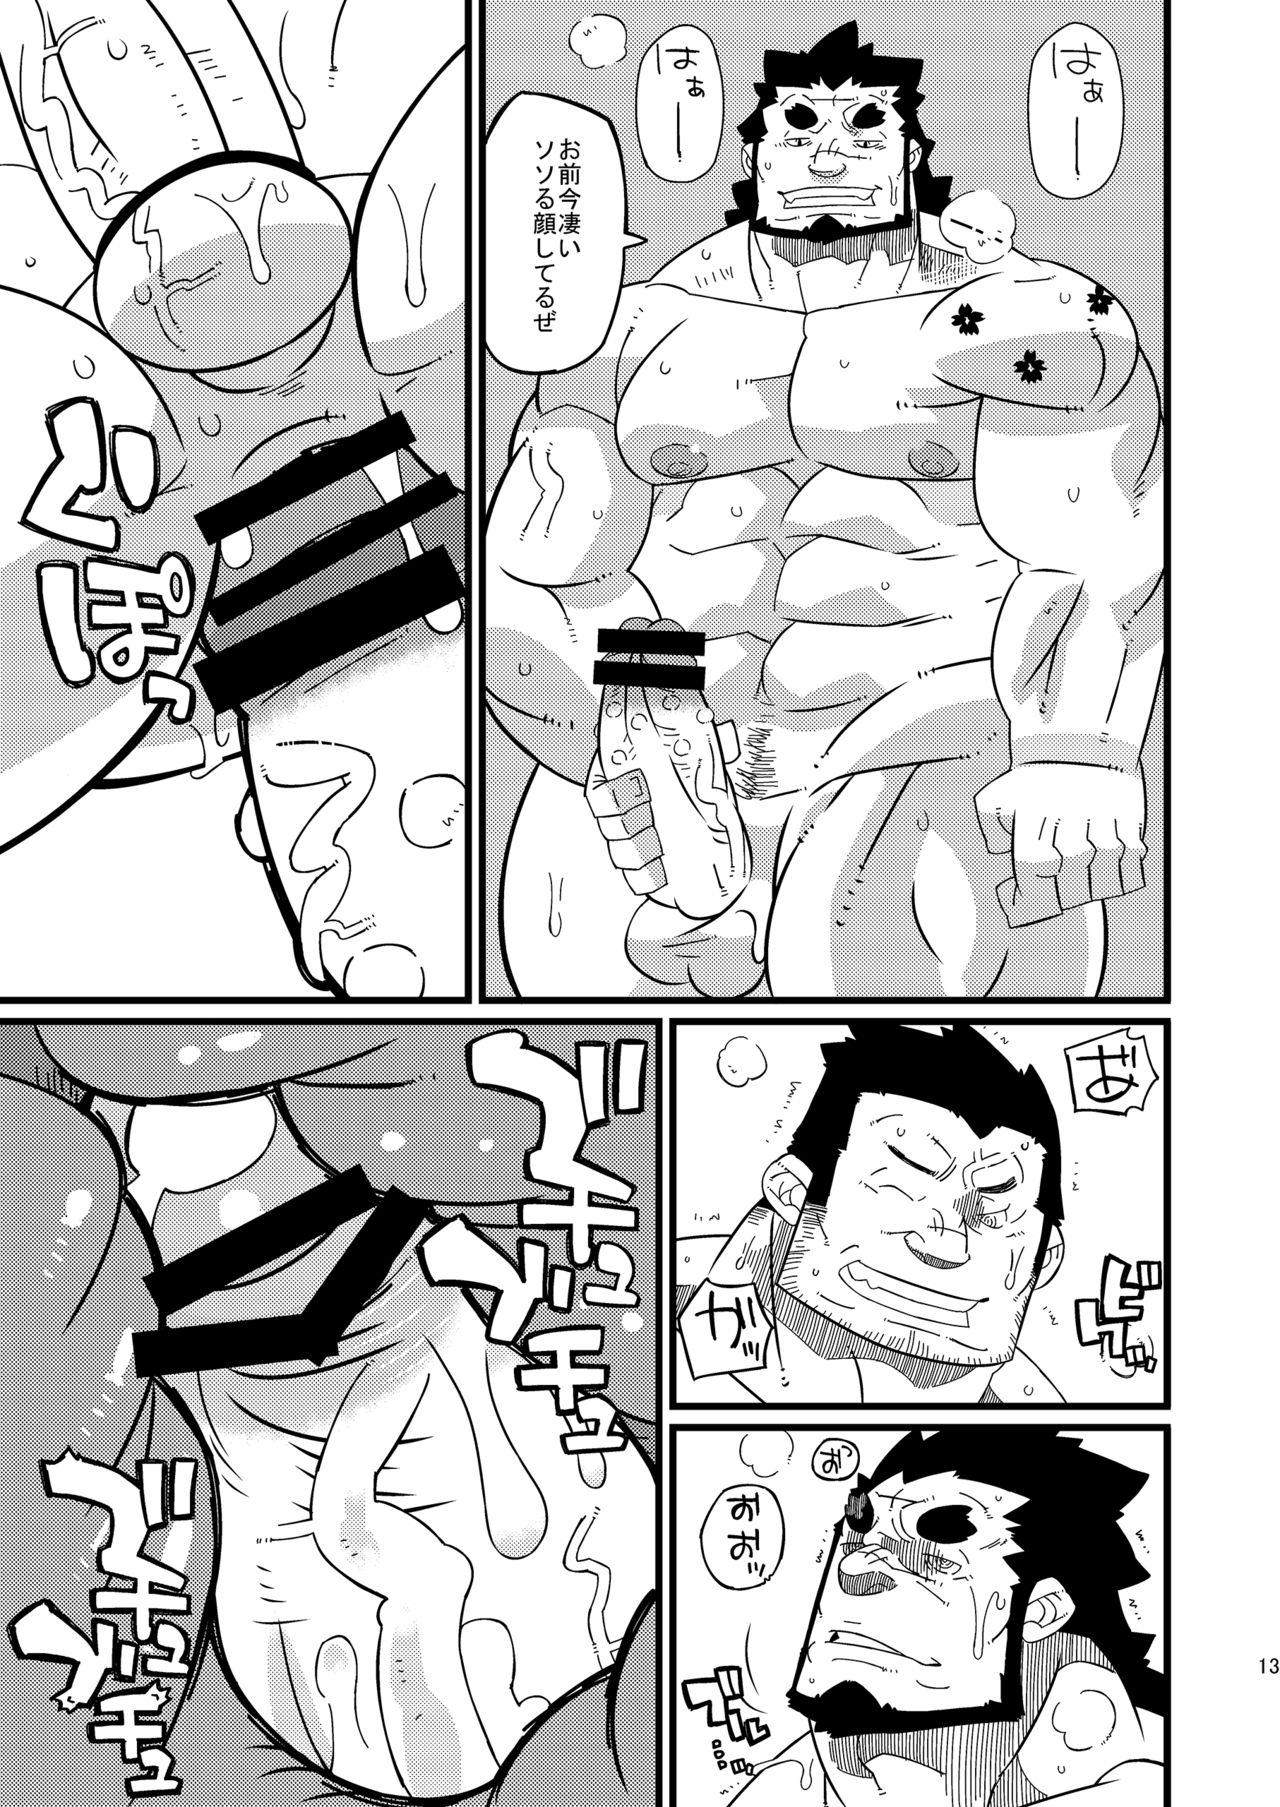 Teenager Osu! 08 Drag Driver Stripping - Page 12